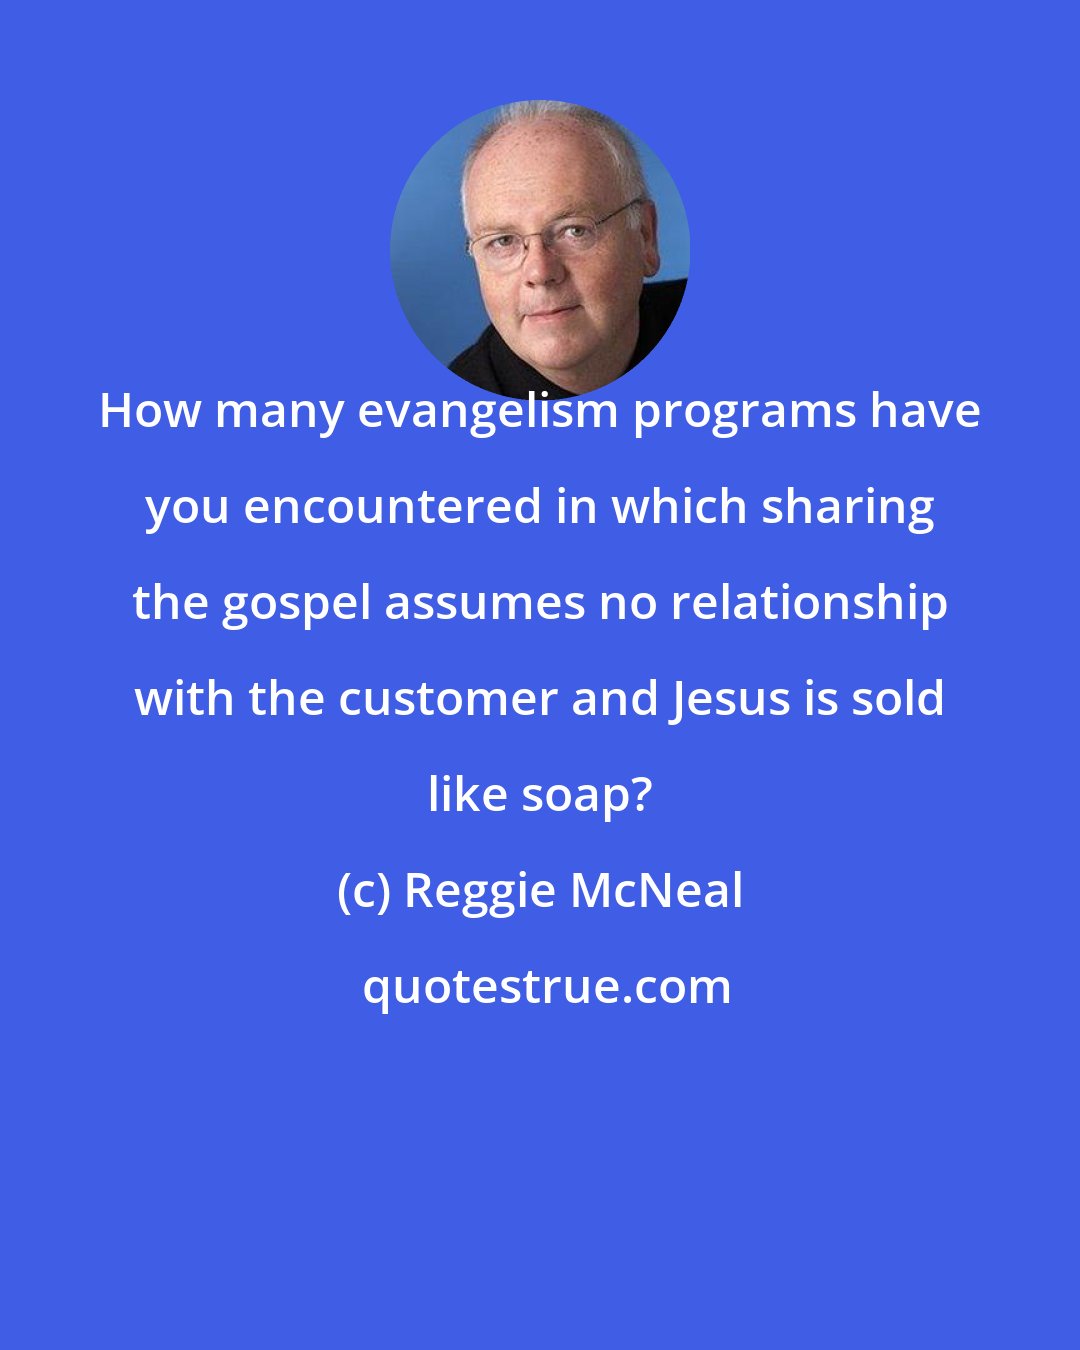 Reggie McNeal: How many evangelism programs have you encountered in which sharing the gospel assumes no relationship with the customer and Jesus is sold like soap?